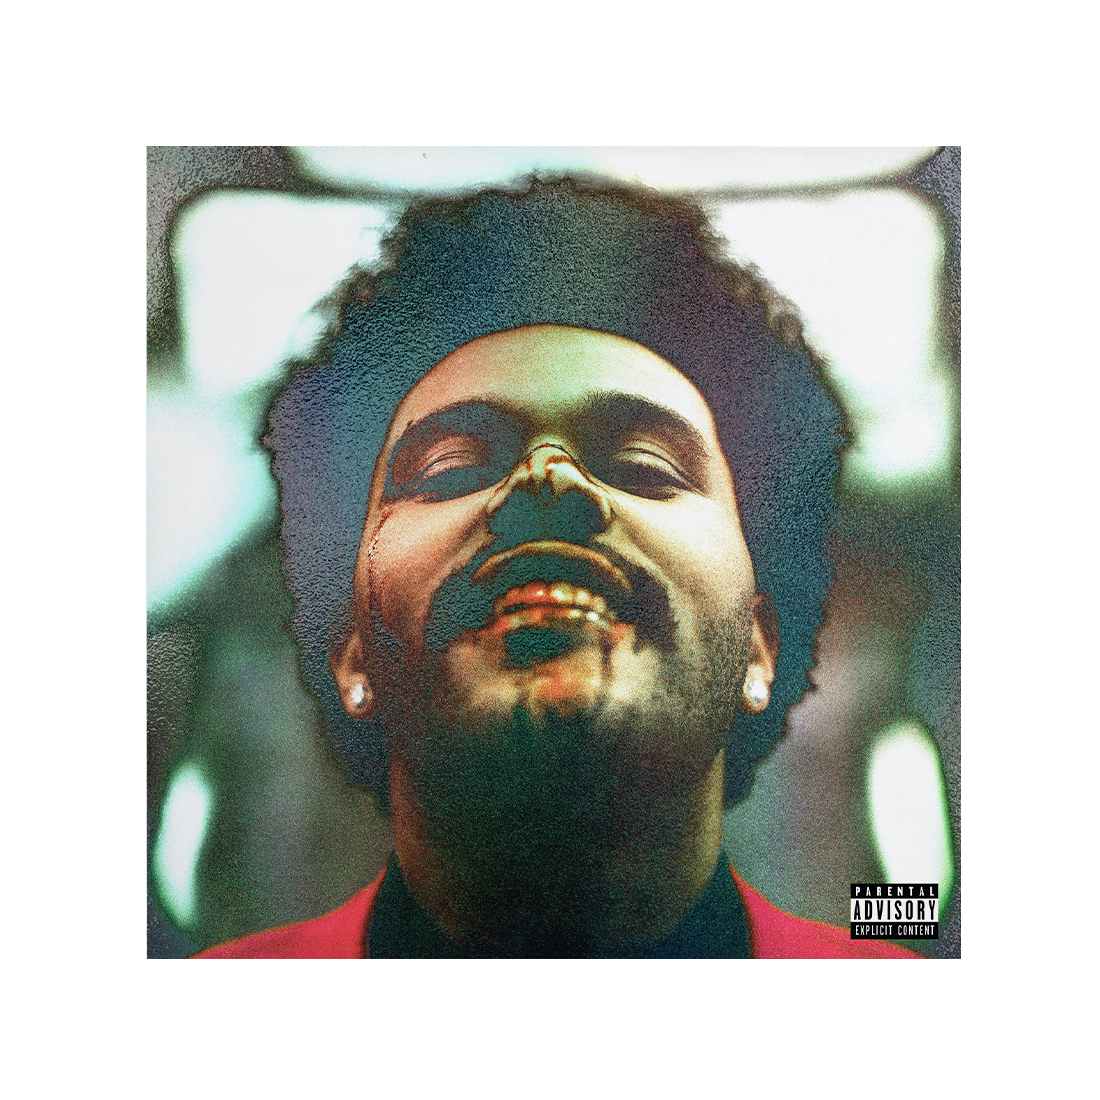 THE WEEKND - AFTER HOURS – CulturedPrint